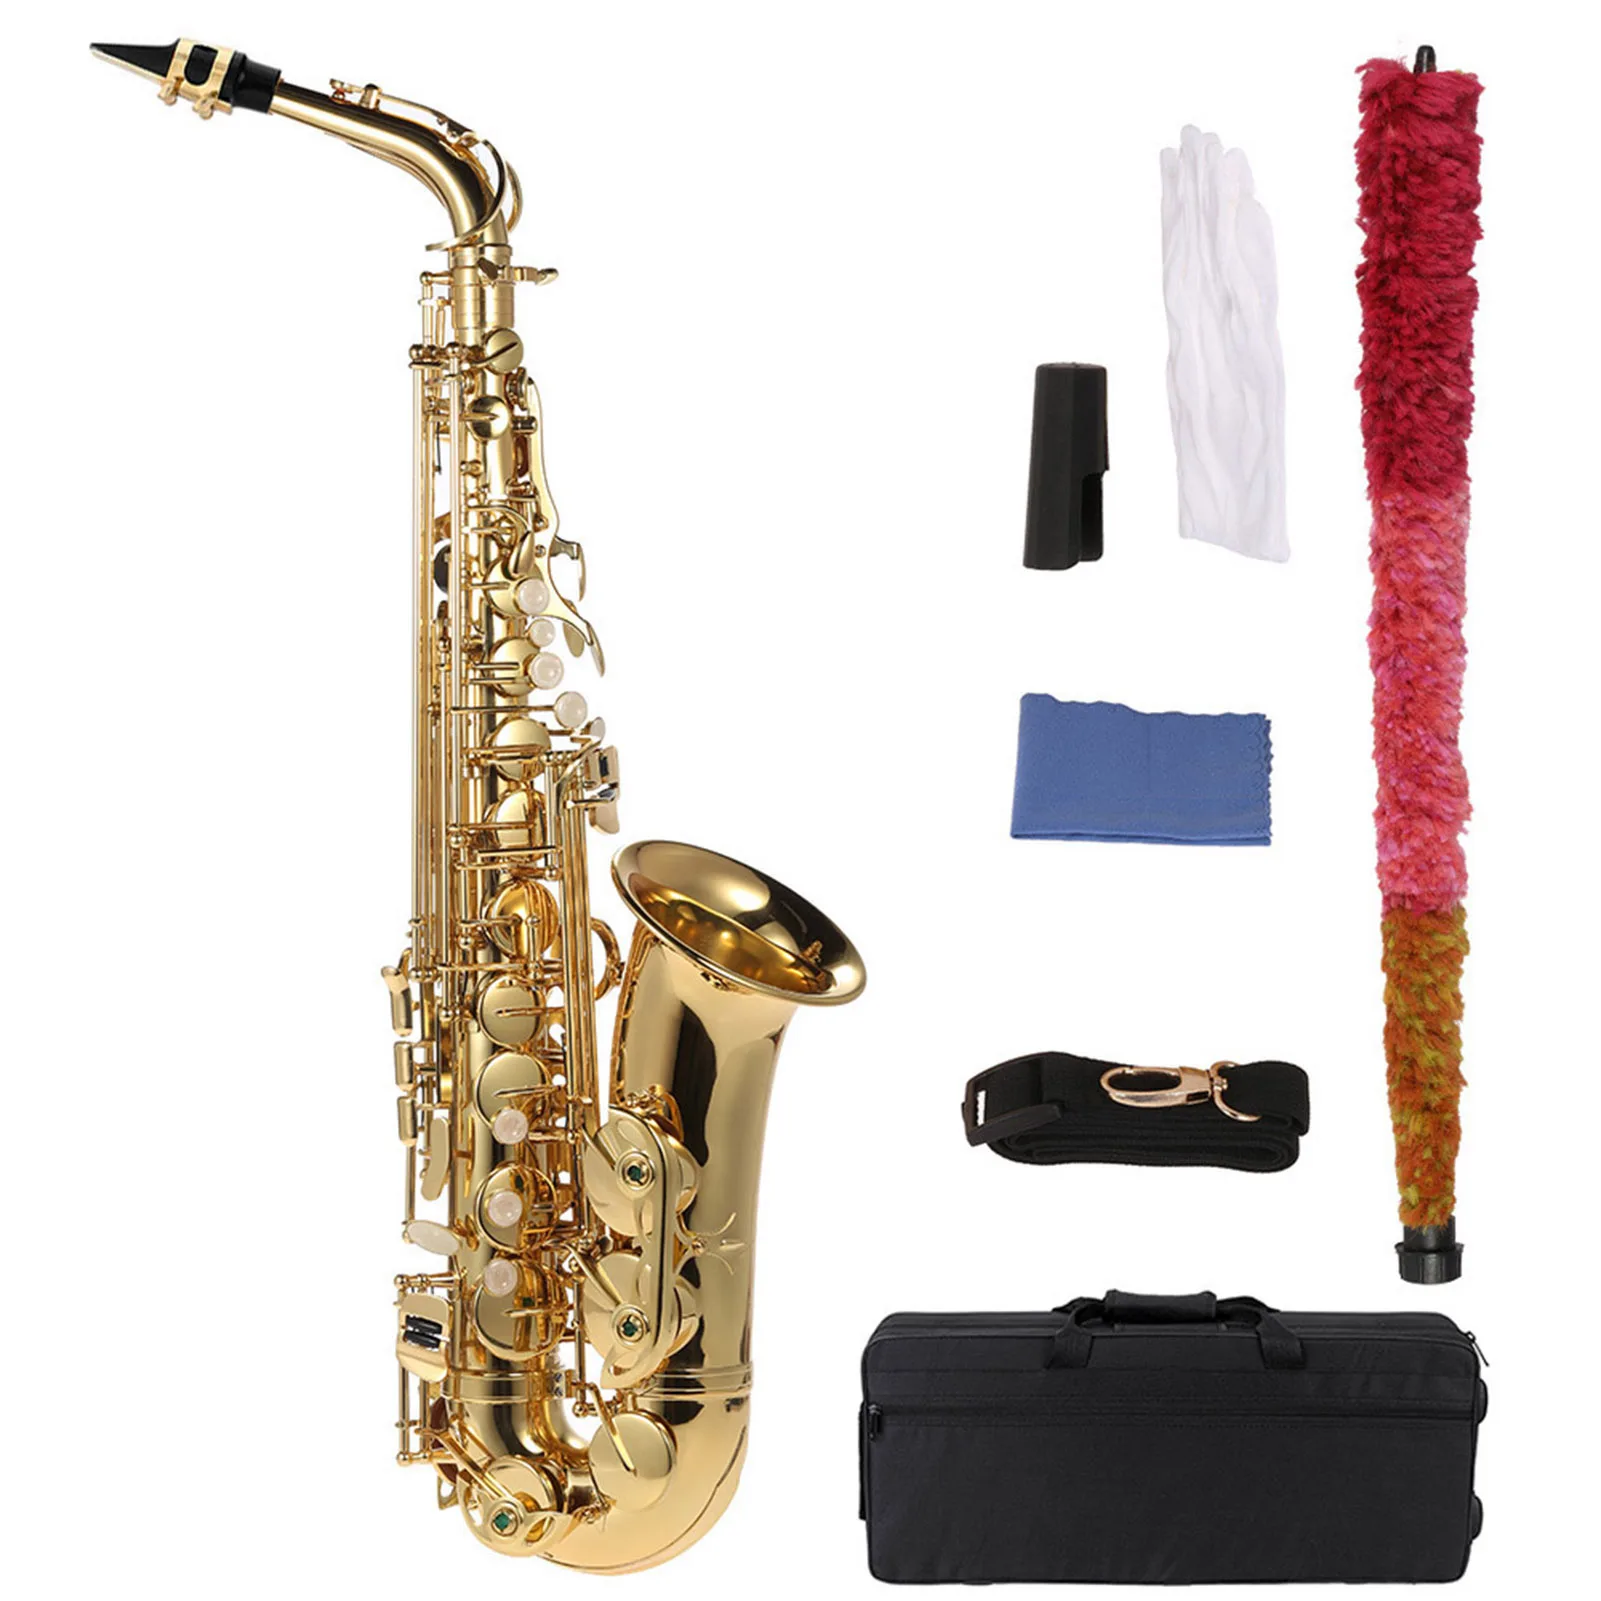 

Eb Alto Saxophone Brass Lacquered Gold E Flat Sax 82Z Key Type Woodwind Instrument high quality In stock with Accessories